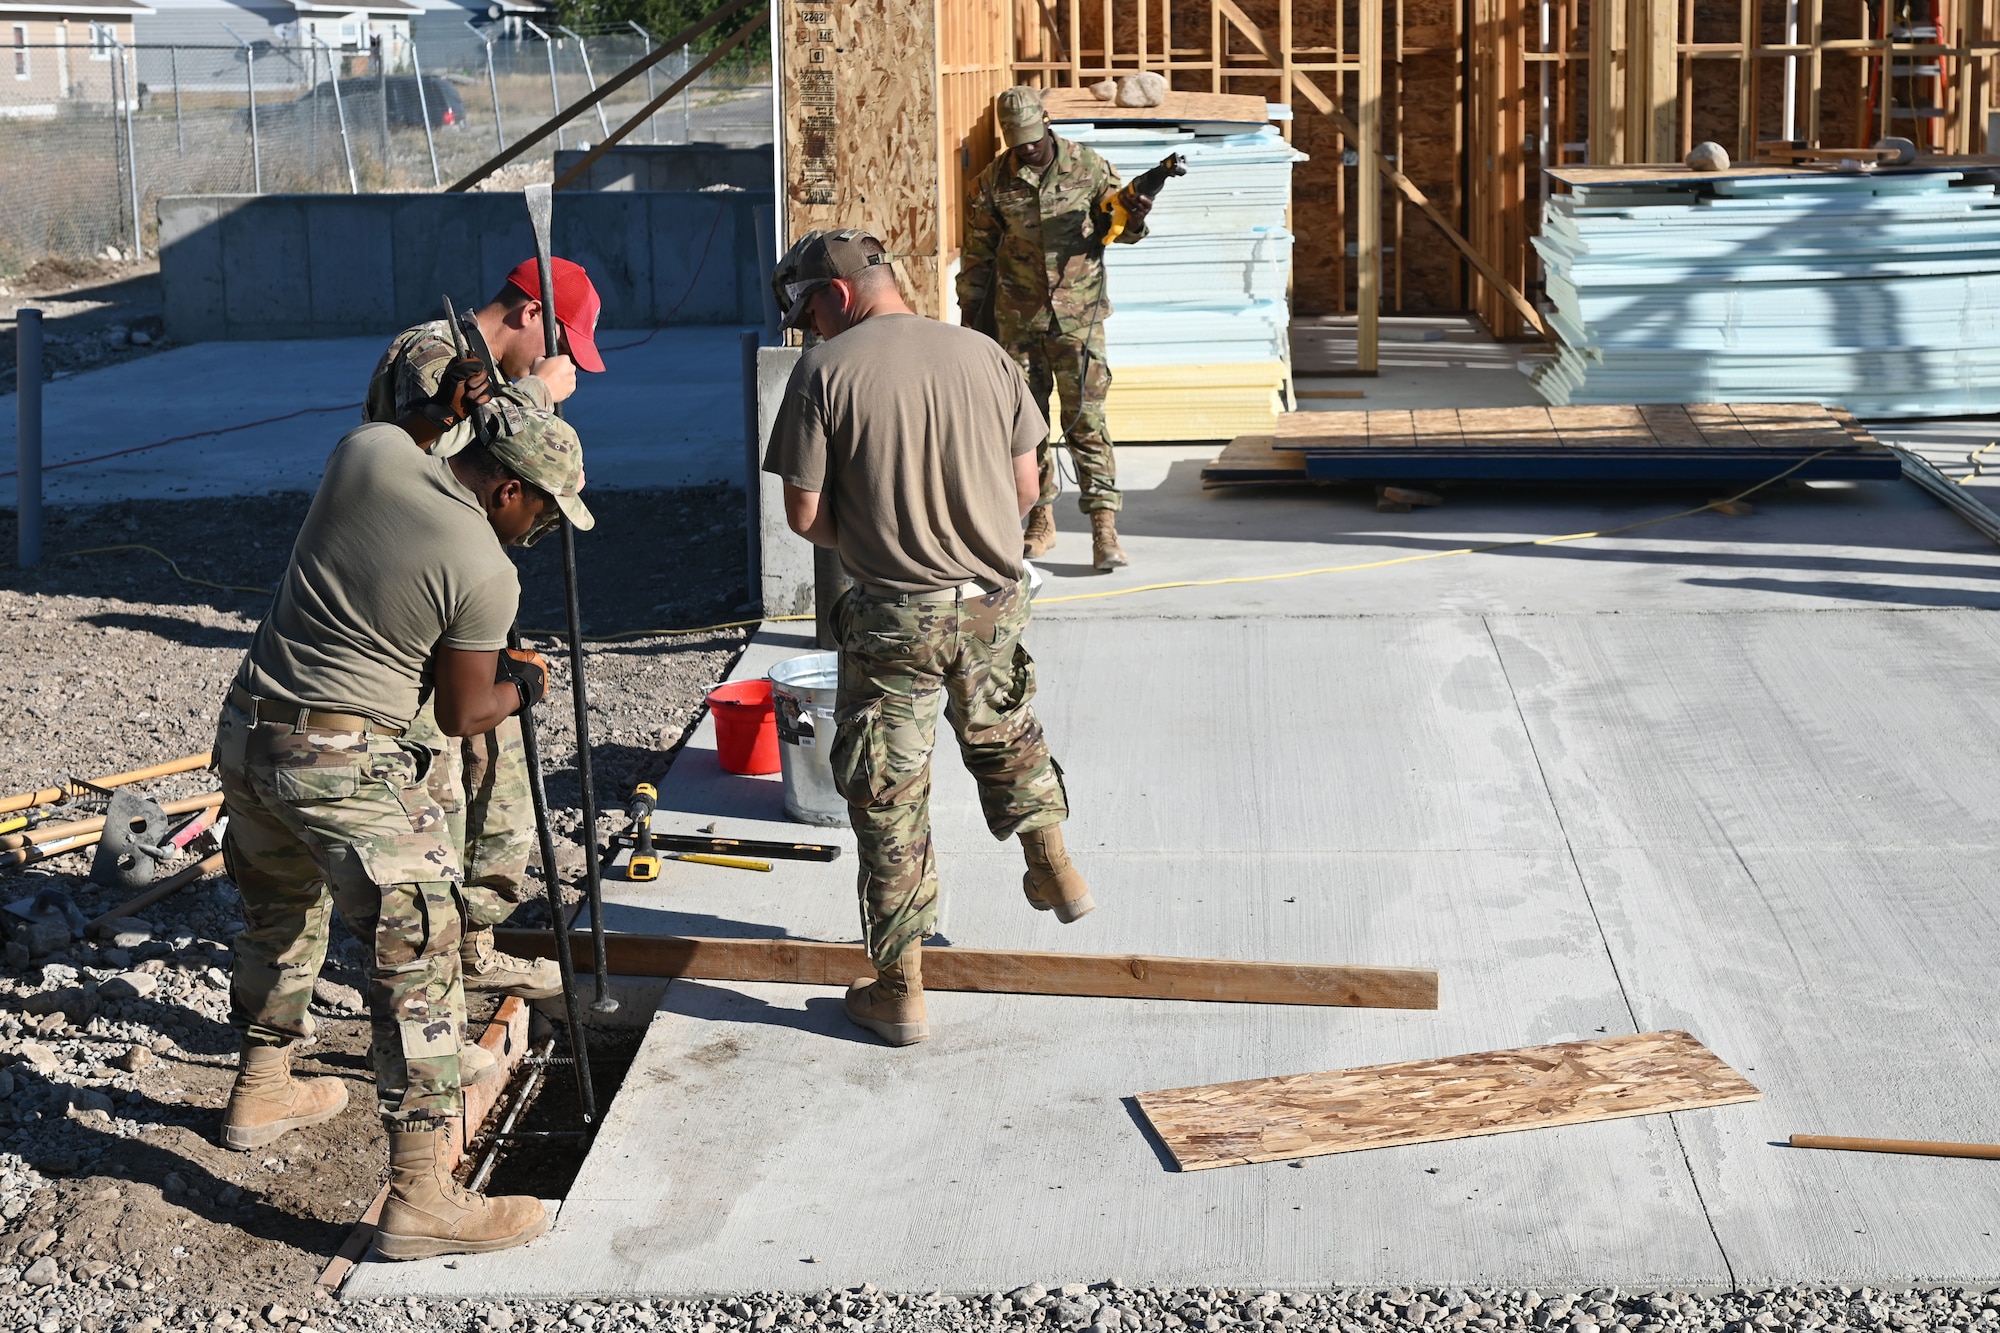 U.S. Air Force Airmen assigned to the 169th Civil Engineer Squadron from the South Carolina Air National Guard and the 219th Red Horse Squadron from the Montana Air National Guard make concrete repairs during construction of a community center for the Blackfeet Nation Native Americans at Heart Butte, Montana, September 6, 2022. This temporary deployment is part of the 169th Civil Engineer Squadron’s yearly Innovative Readiness Training (IRT) that helps Airmen train in a real-world environment to acquire and maintain their trade skills. (U.S. Air National Guard photo by Airman 1st Class Amy Rangel, 169th Fighter Wing Public Affairs)